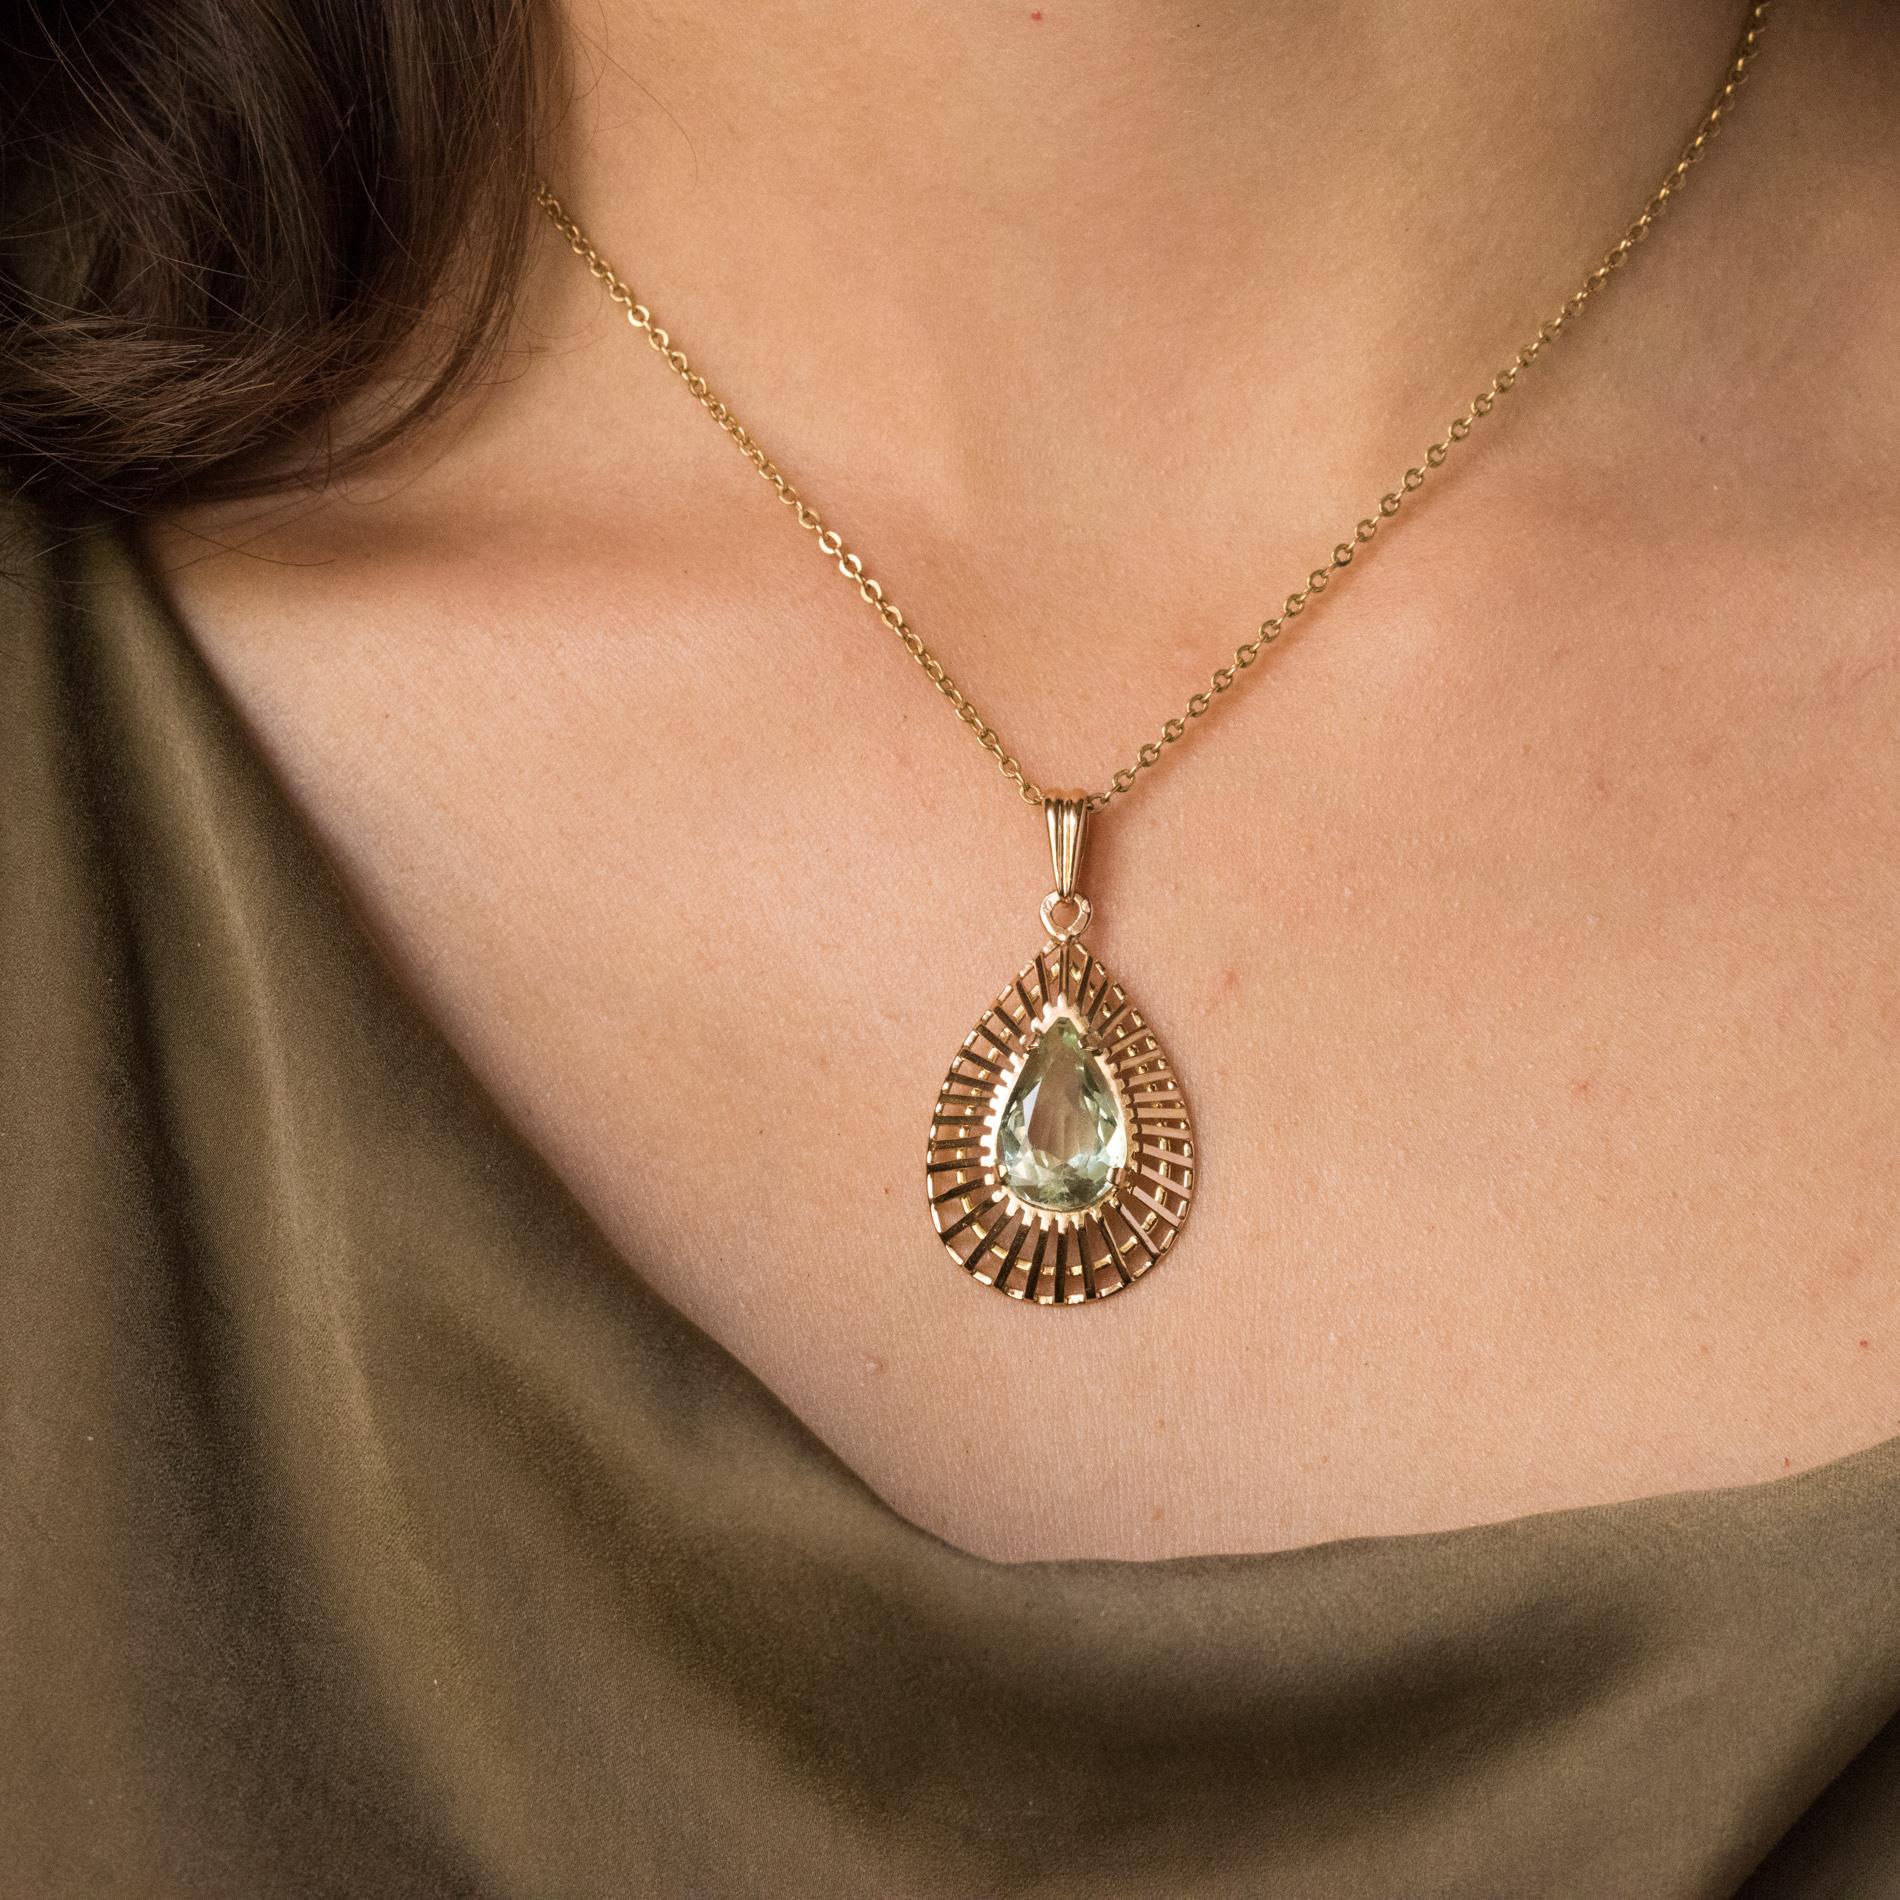 Pendant in 18 carats yellow gold.
In the shape of a drop, this retro pendant is made of gold threads which retain in the center with claws, a pear-cut aquamarine.
Total weight of aquamarine: about 5.30 carats.
Height: 4.3 cm, width: 3.2 cm,